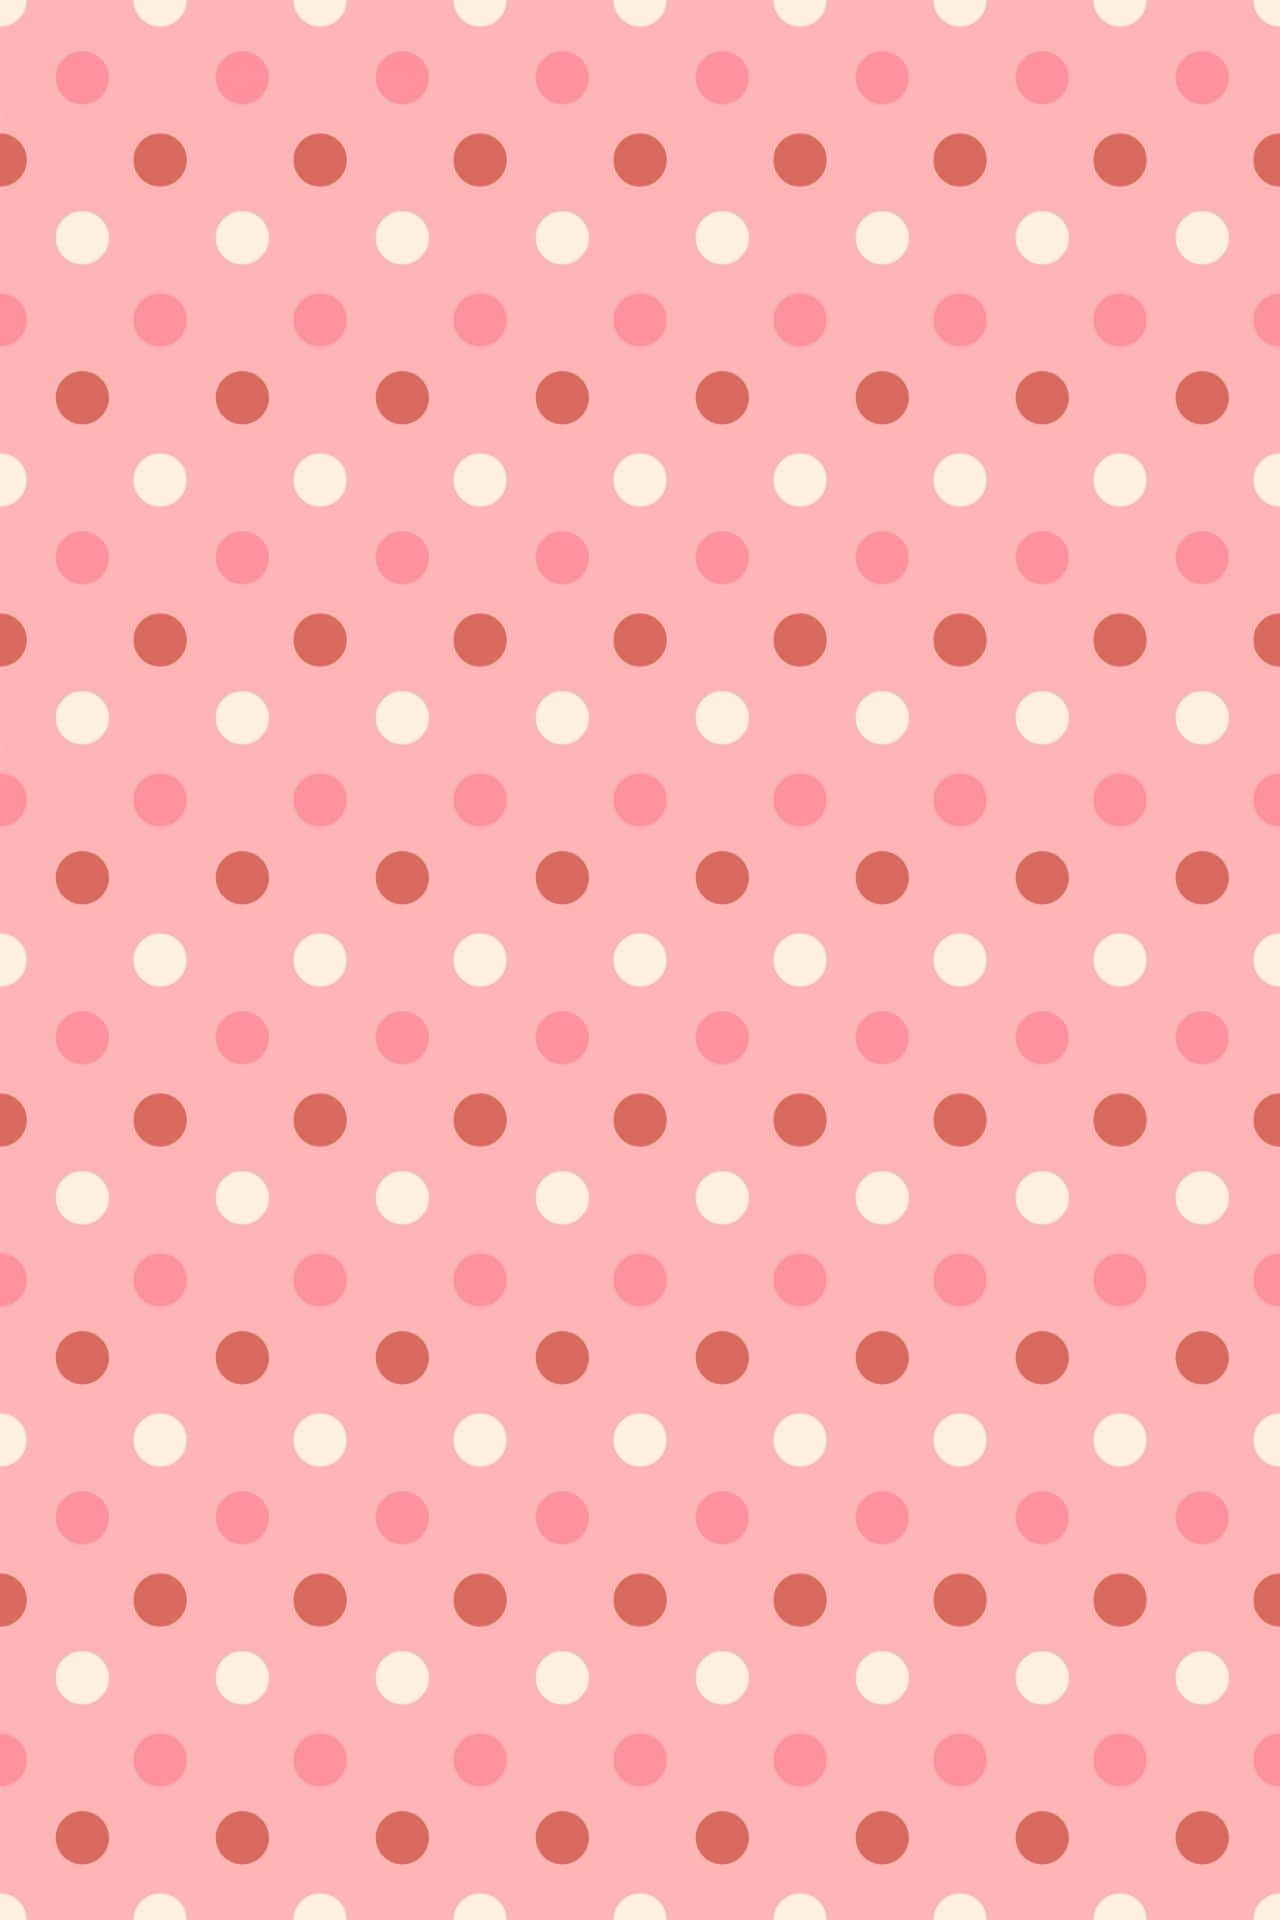 Different Shades Of Pink And White Polk Dot Wallpaper